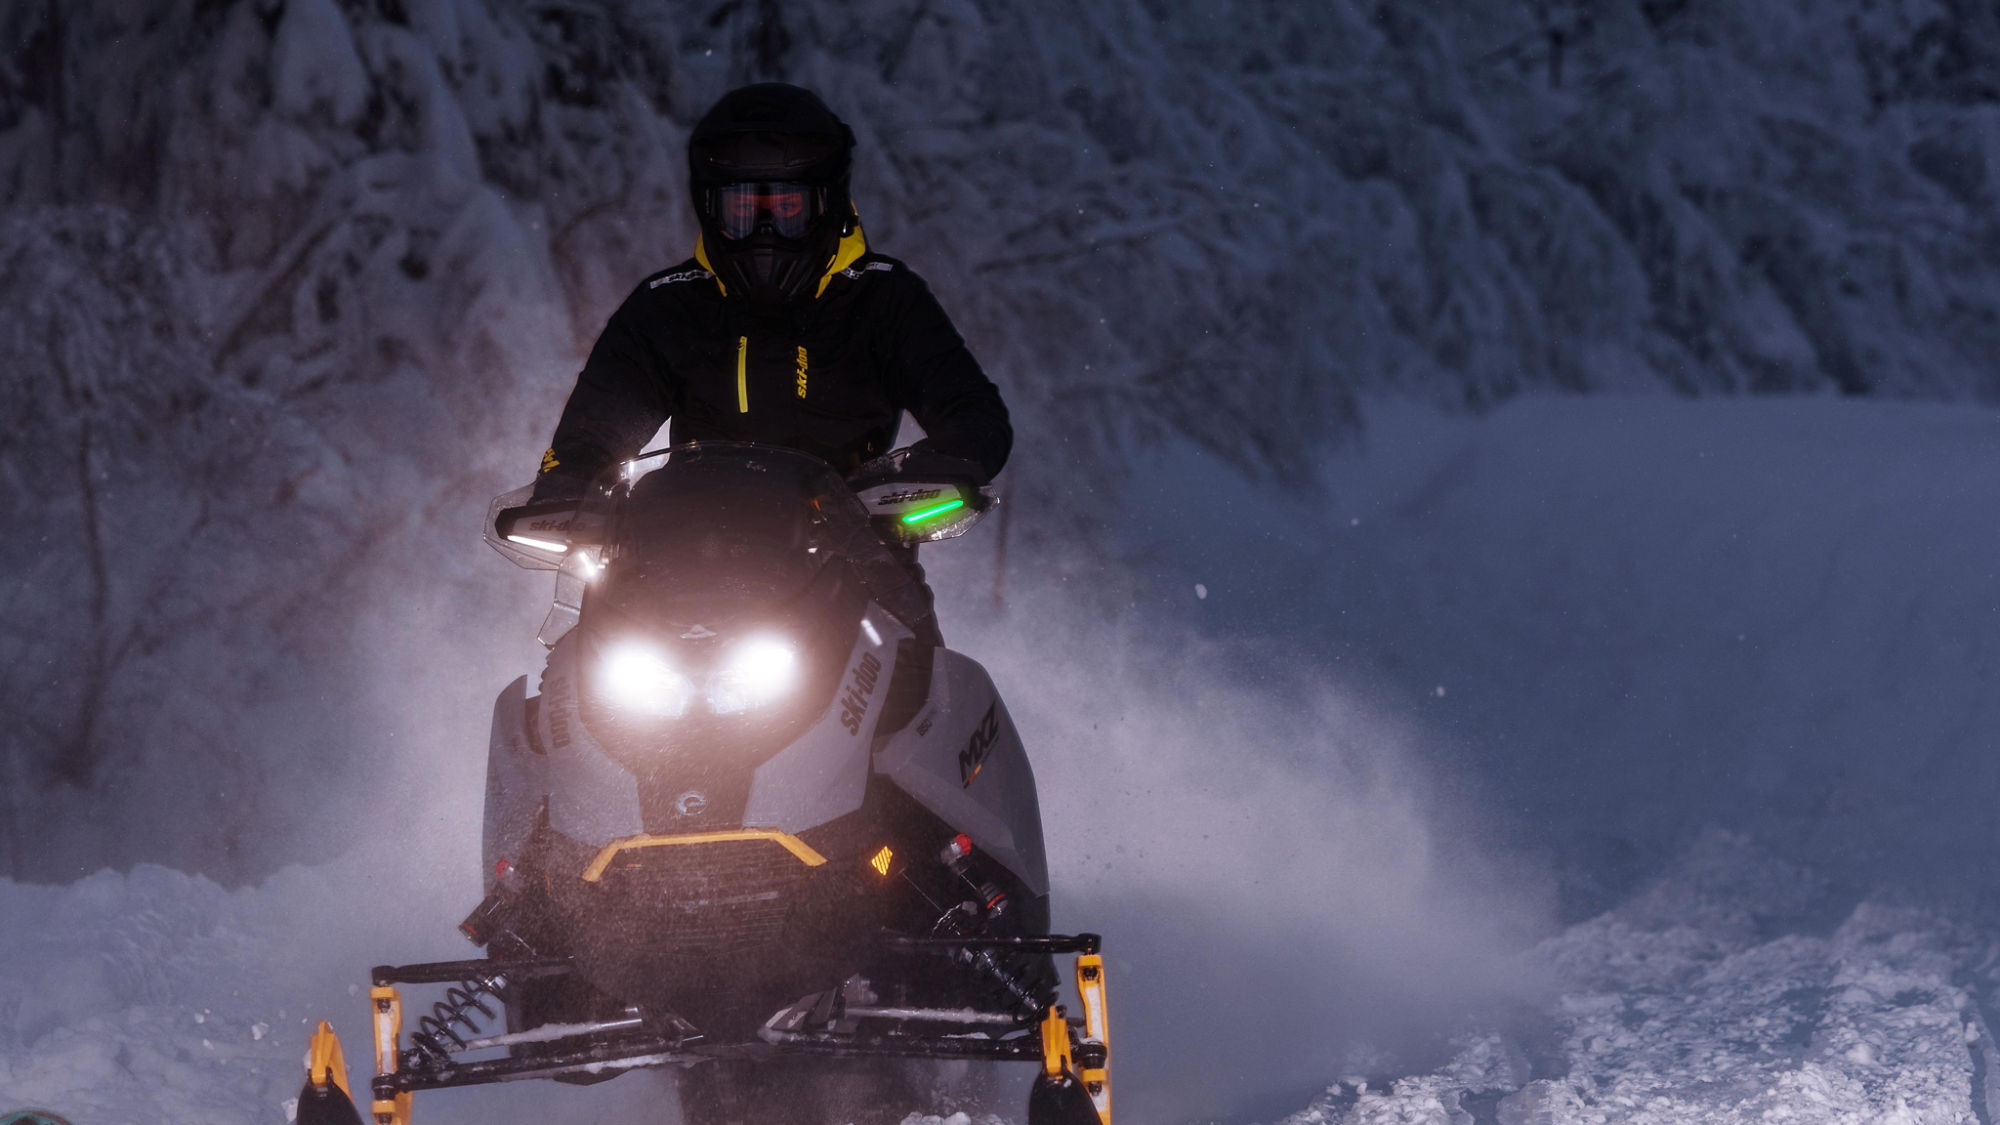 2025 Ski-Doo MXZ riding at night in a snowy forest